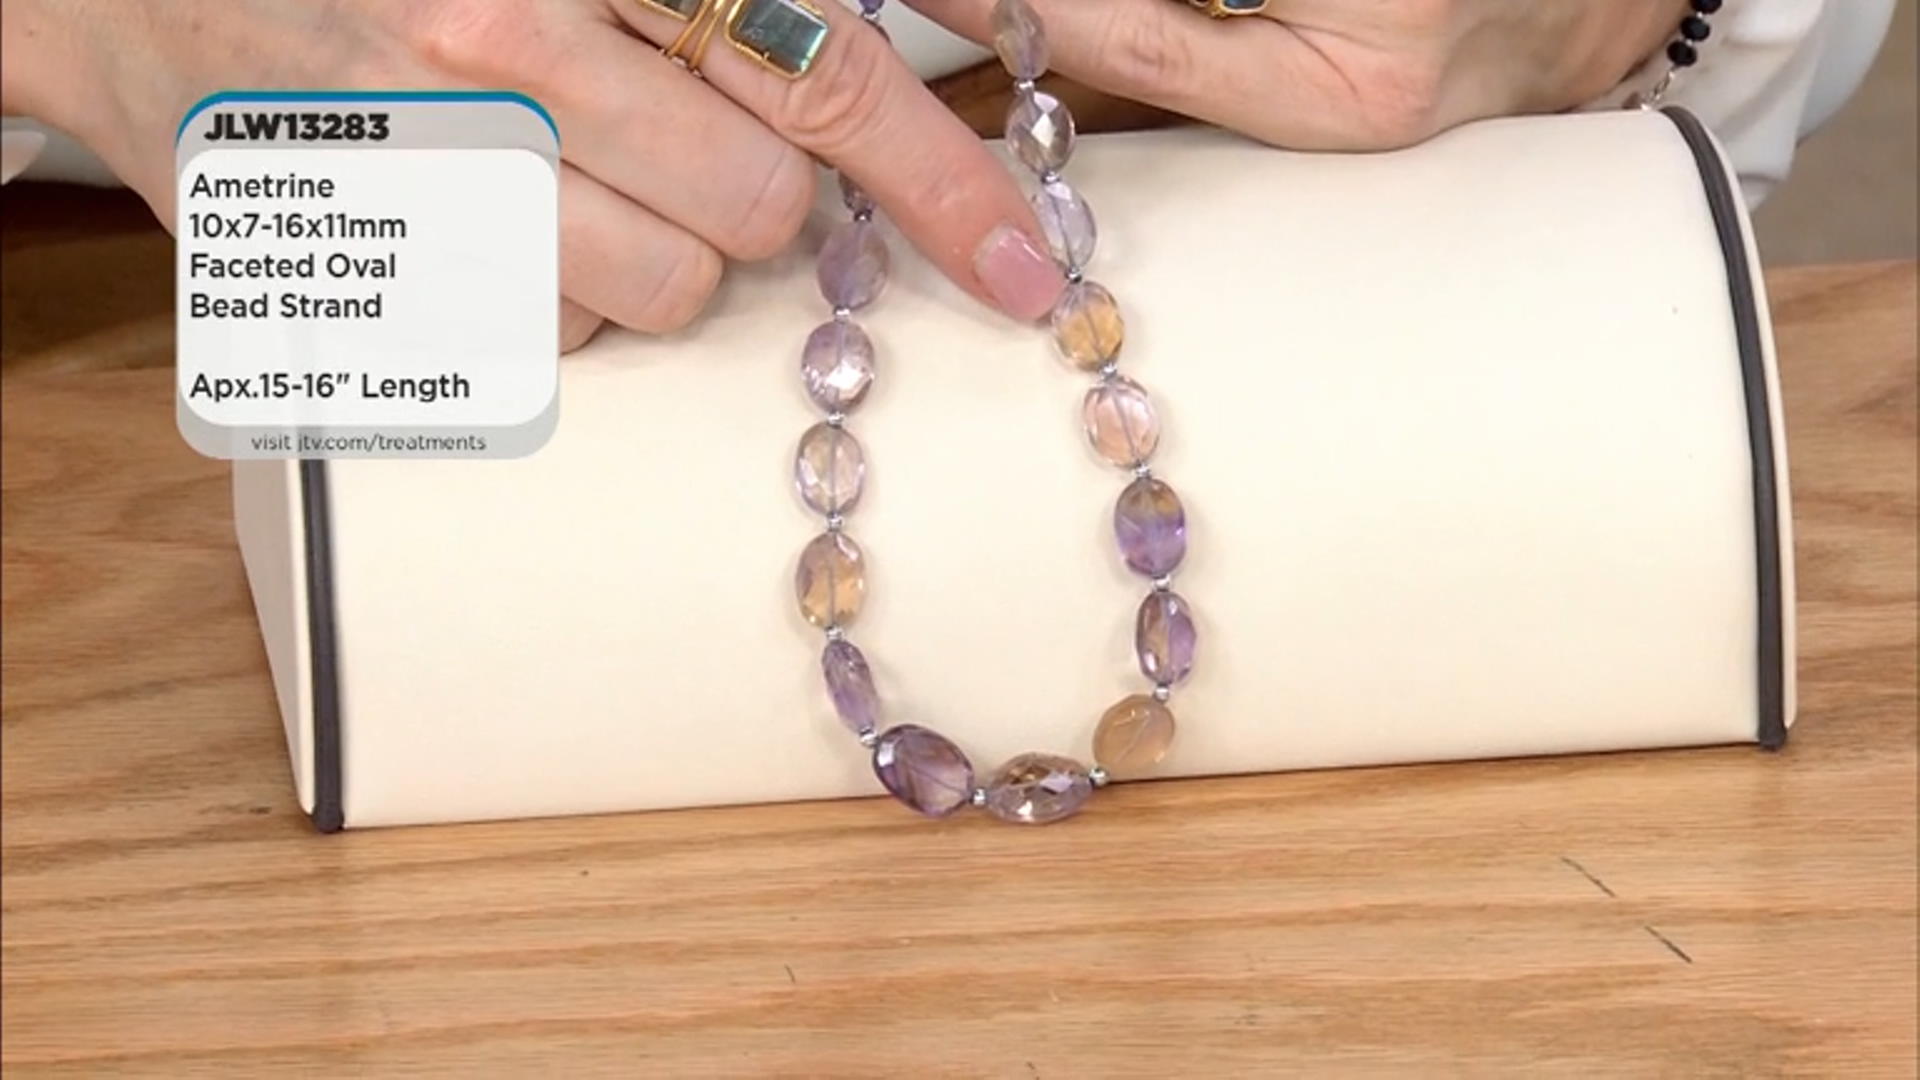 Ametrine 10x7-16x11mm Faceted Oval Bead Strand Appx 15-16" Video Thumbnail